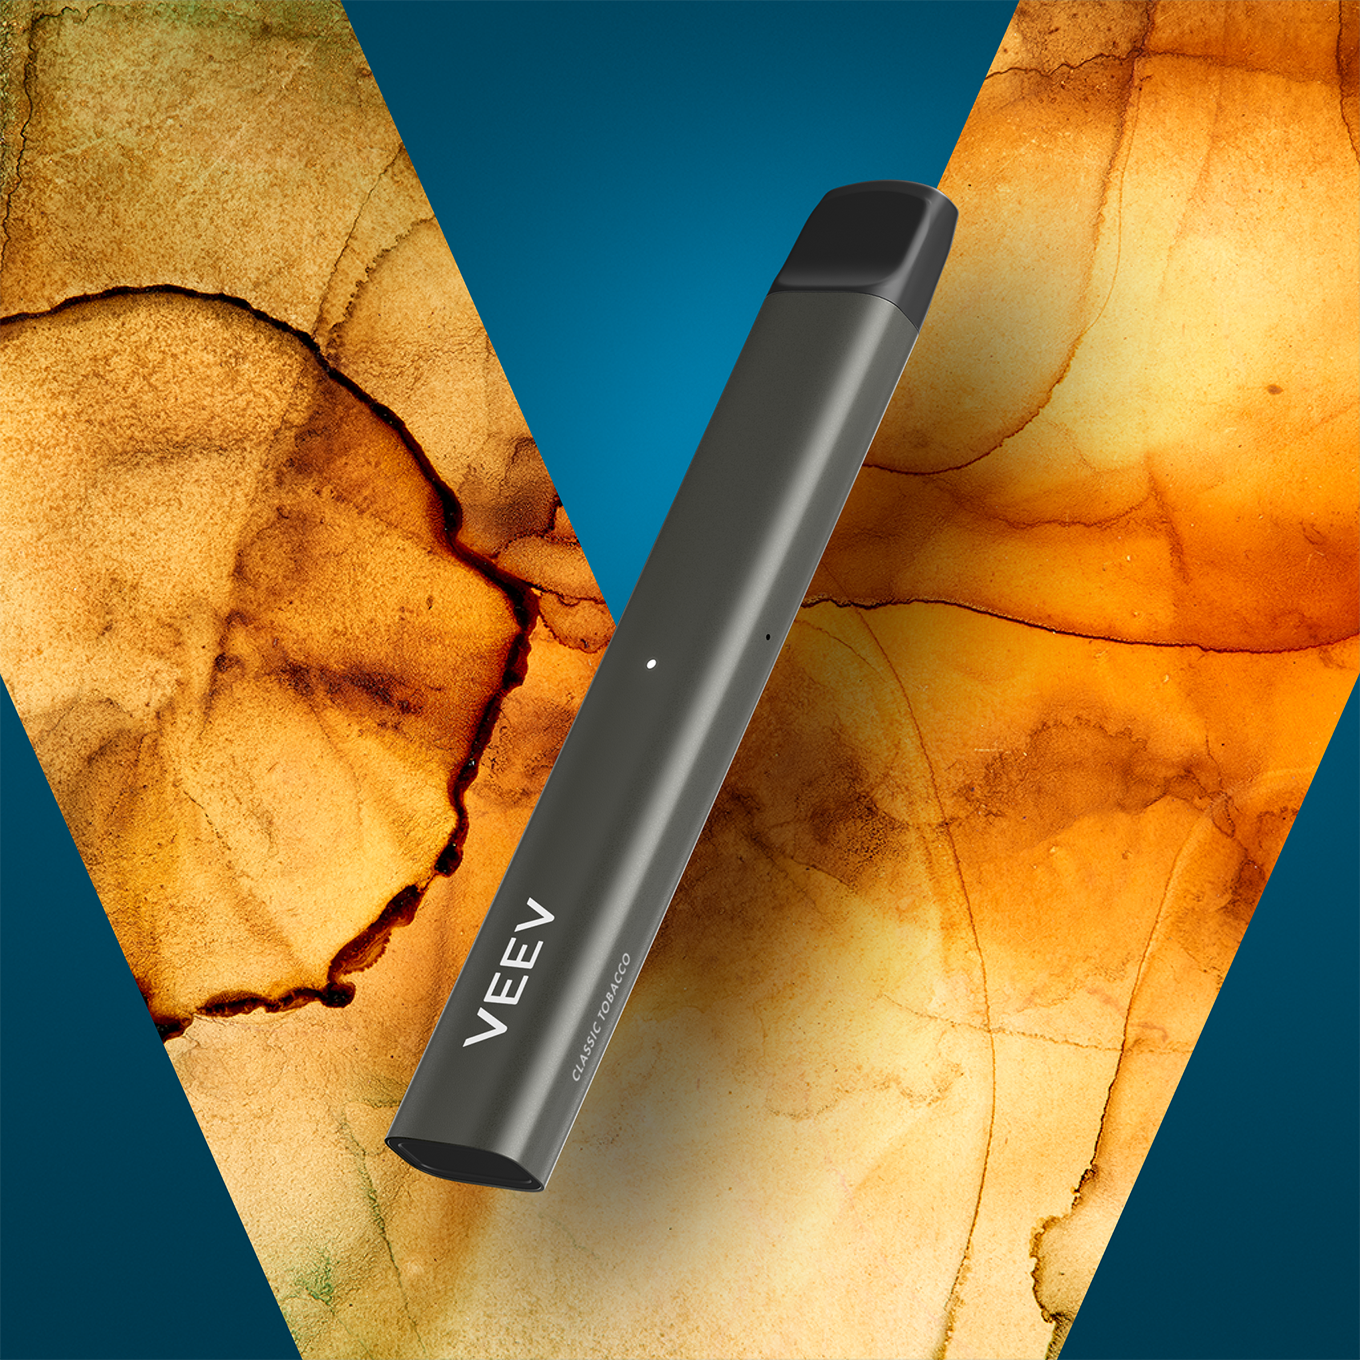 VEEV NOW classic tobacco disposable e-cigarette on VEEV NOW promotional banner